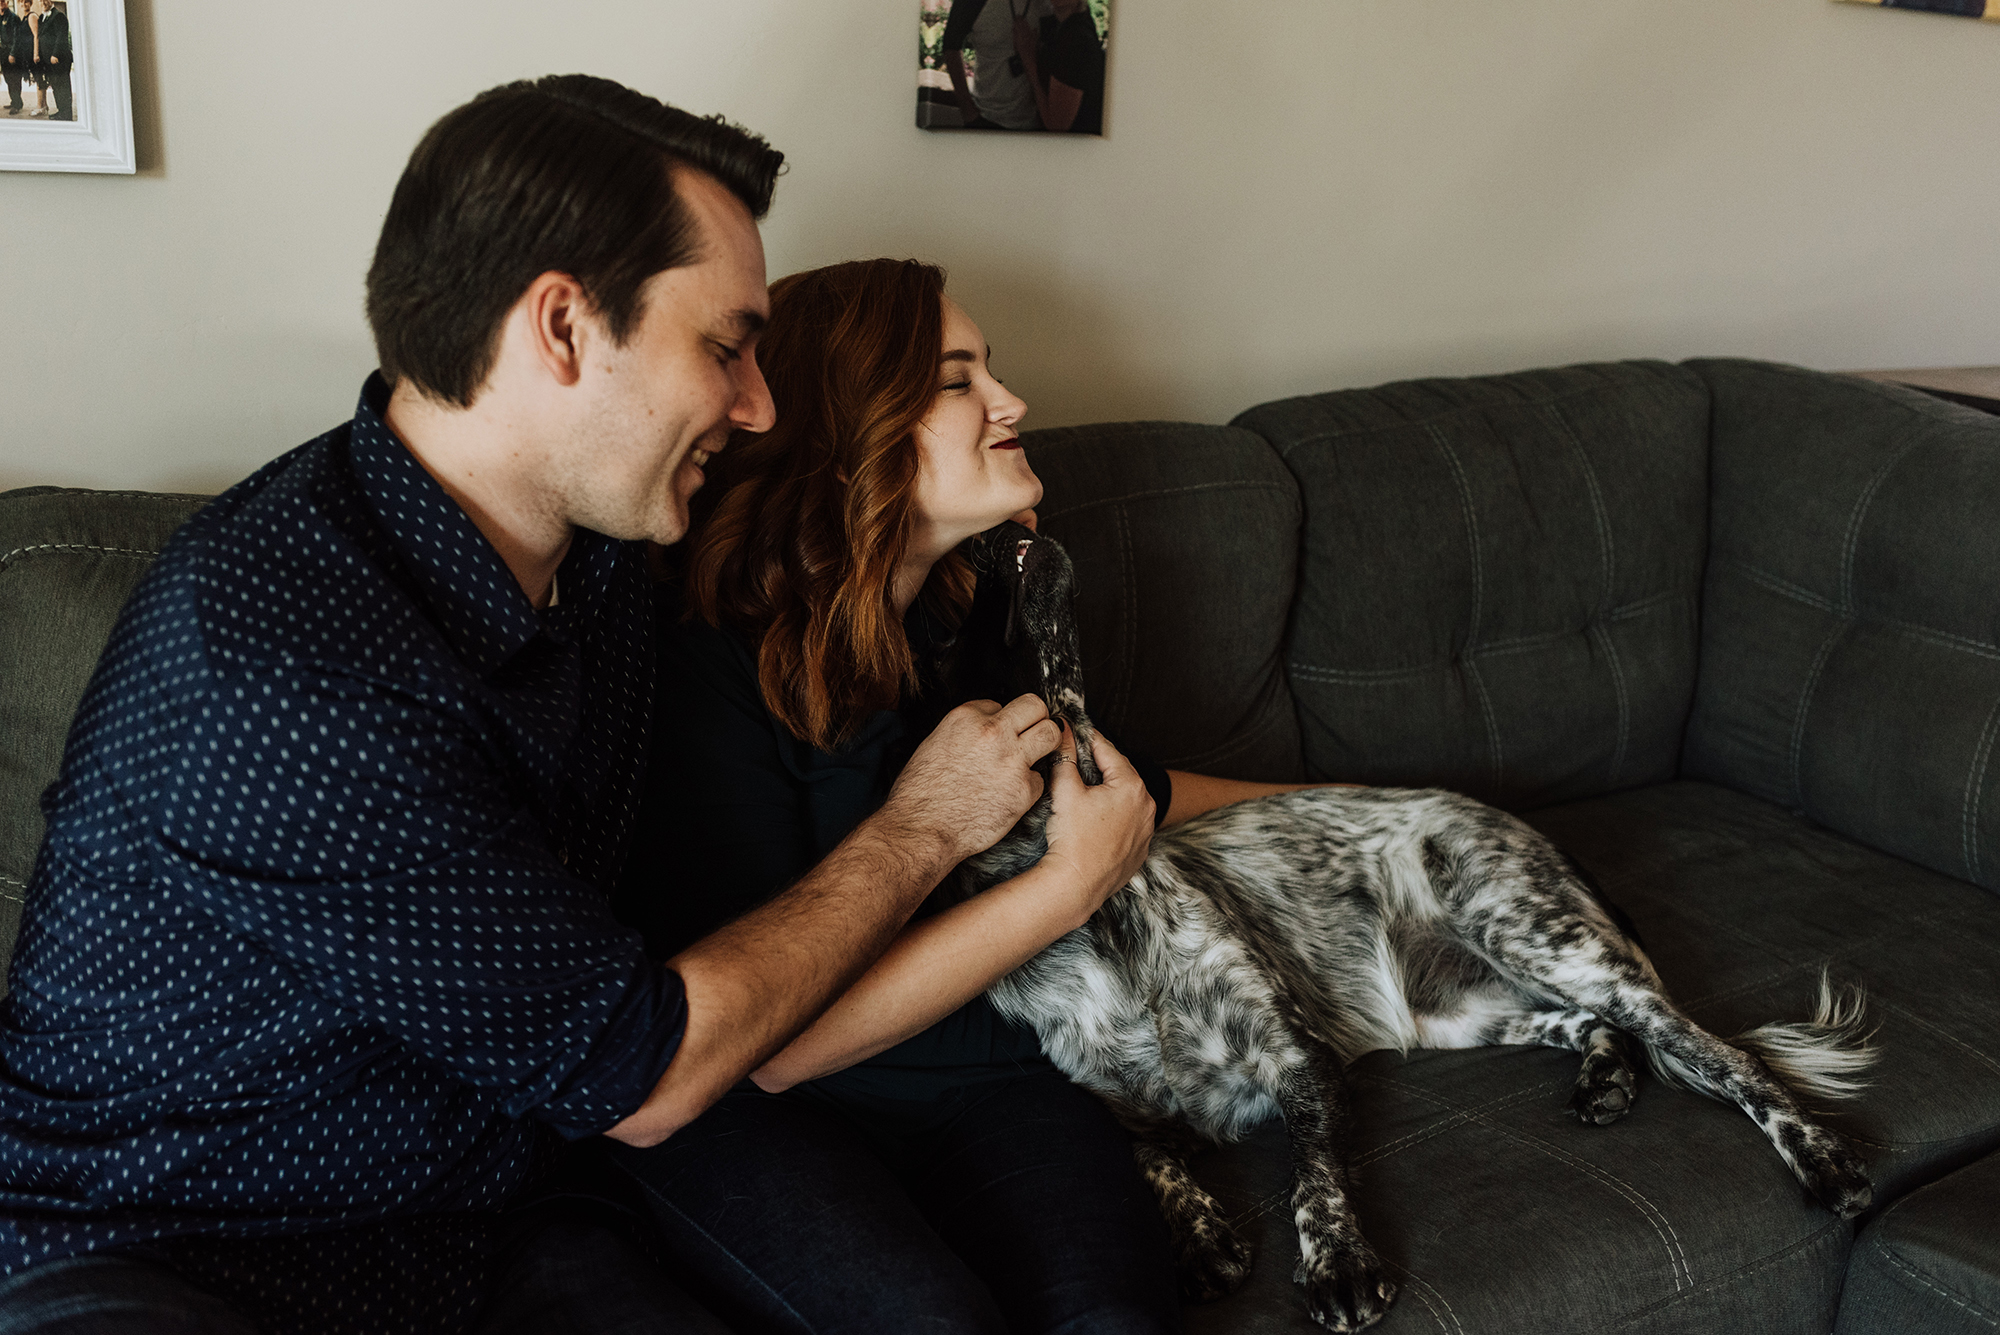 In Home Family Photos with Pets